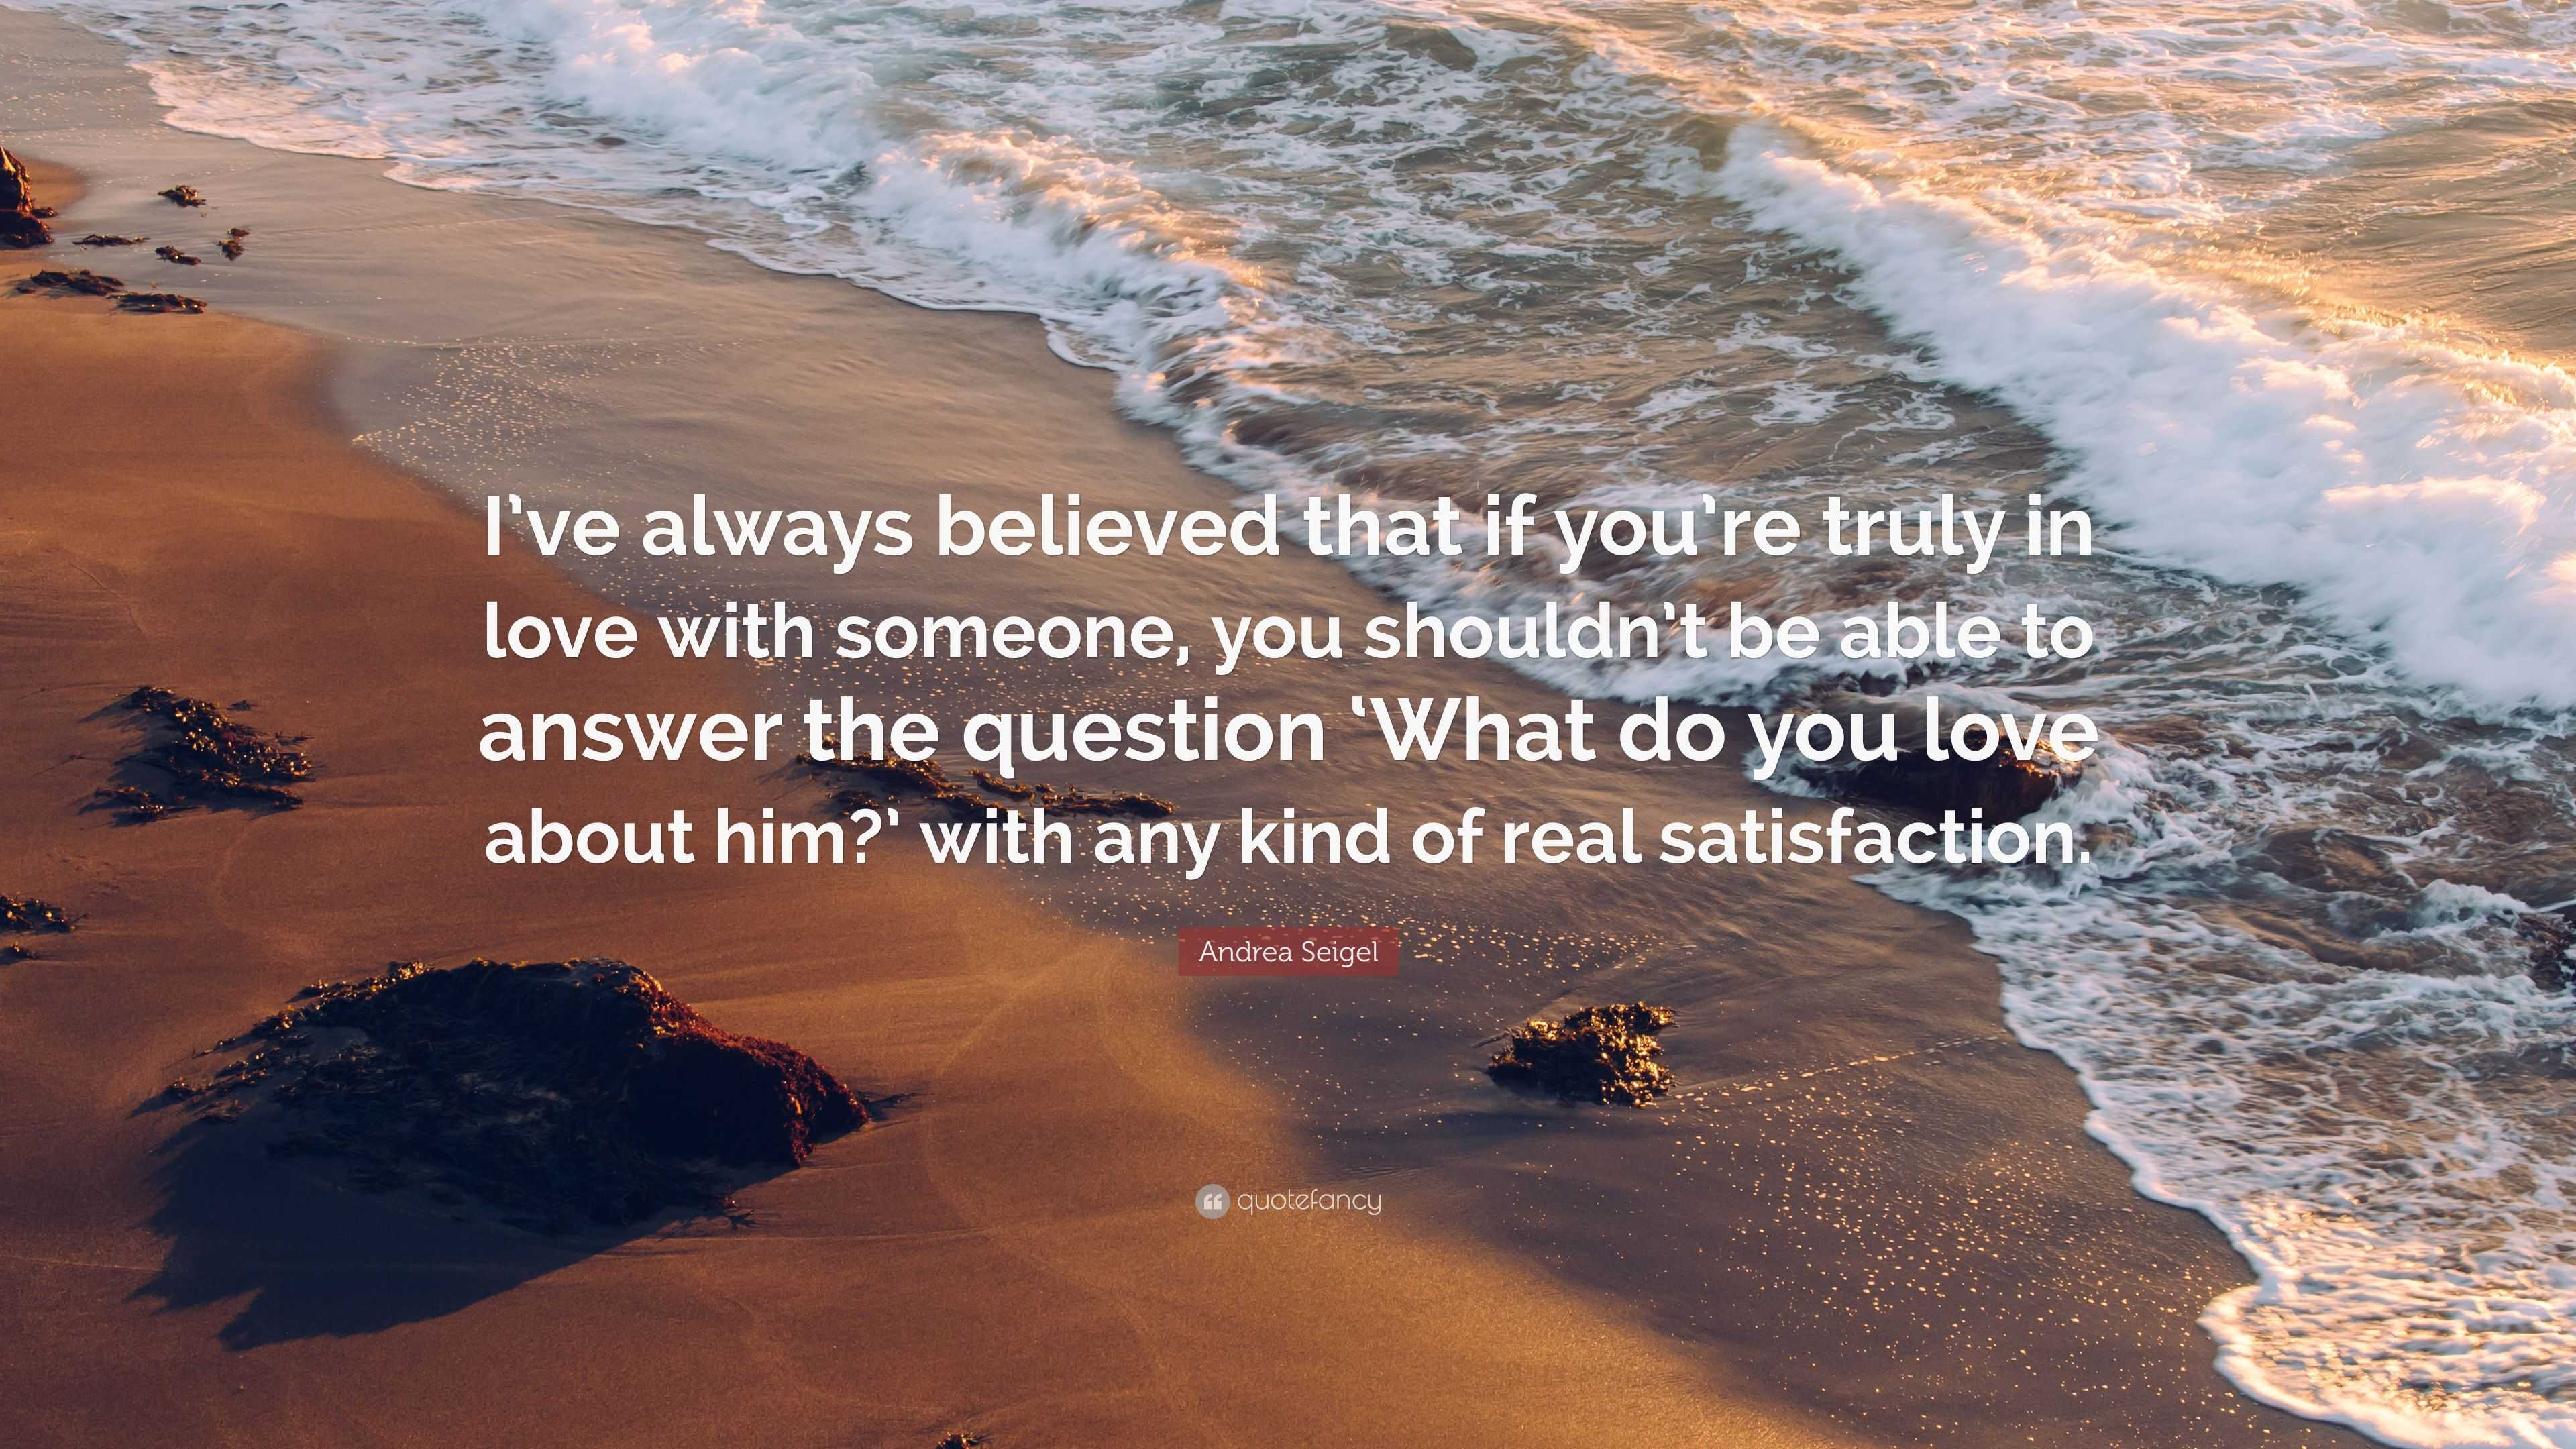 Andrea Seigel Quote: “I’ve always believed that if you’re truly in love ...